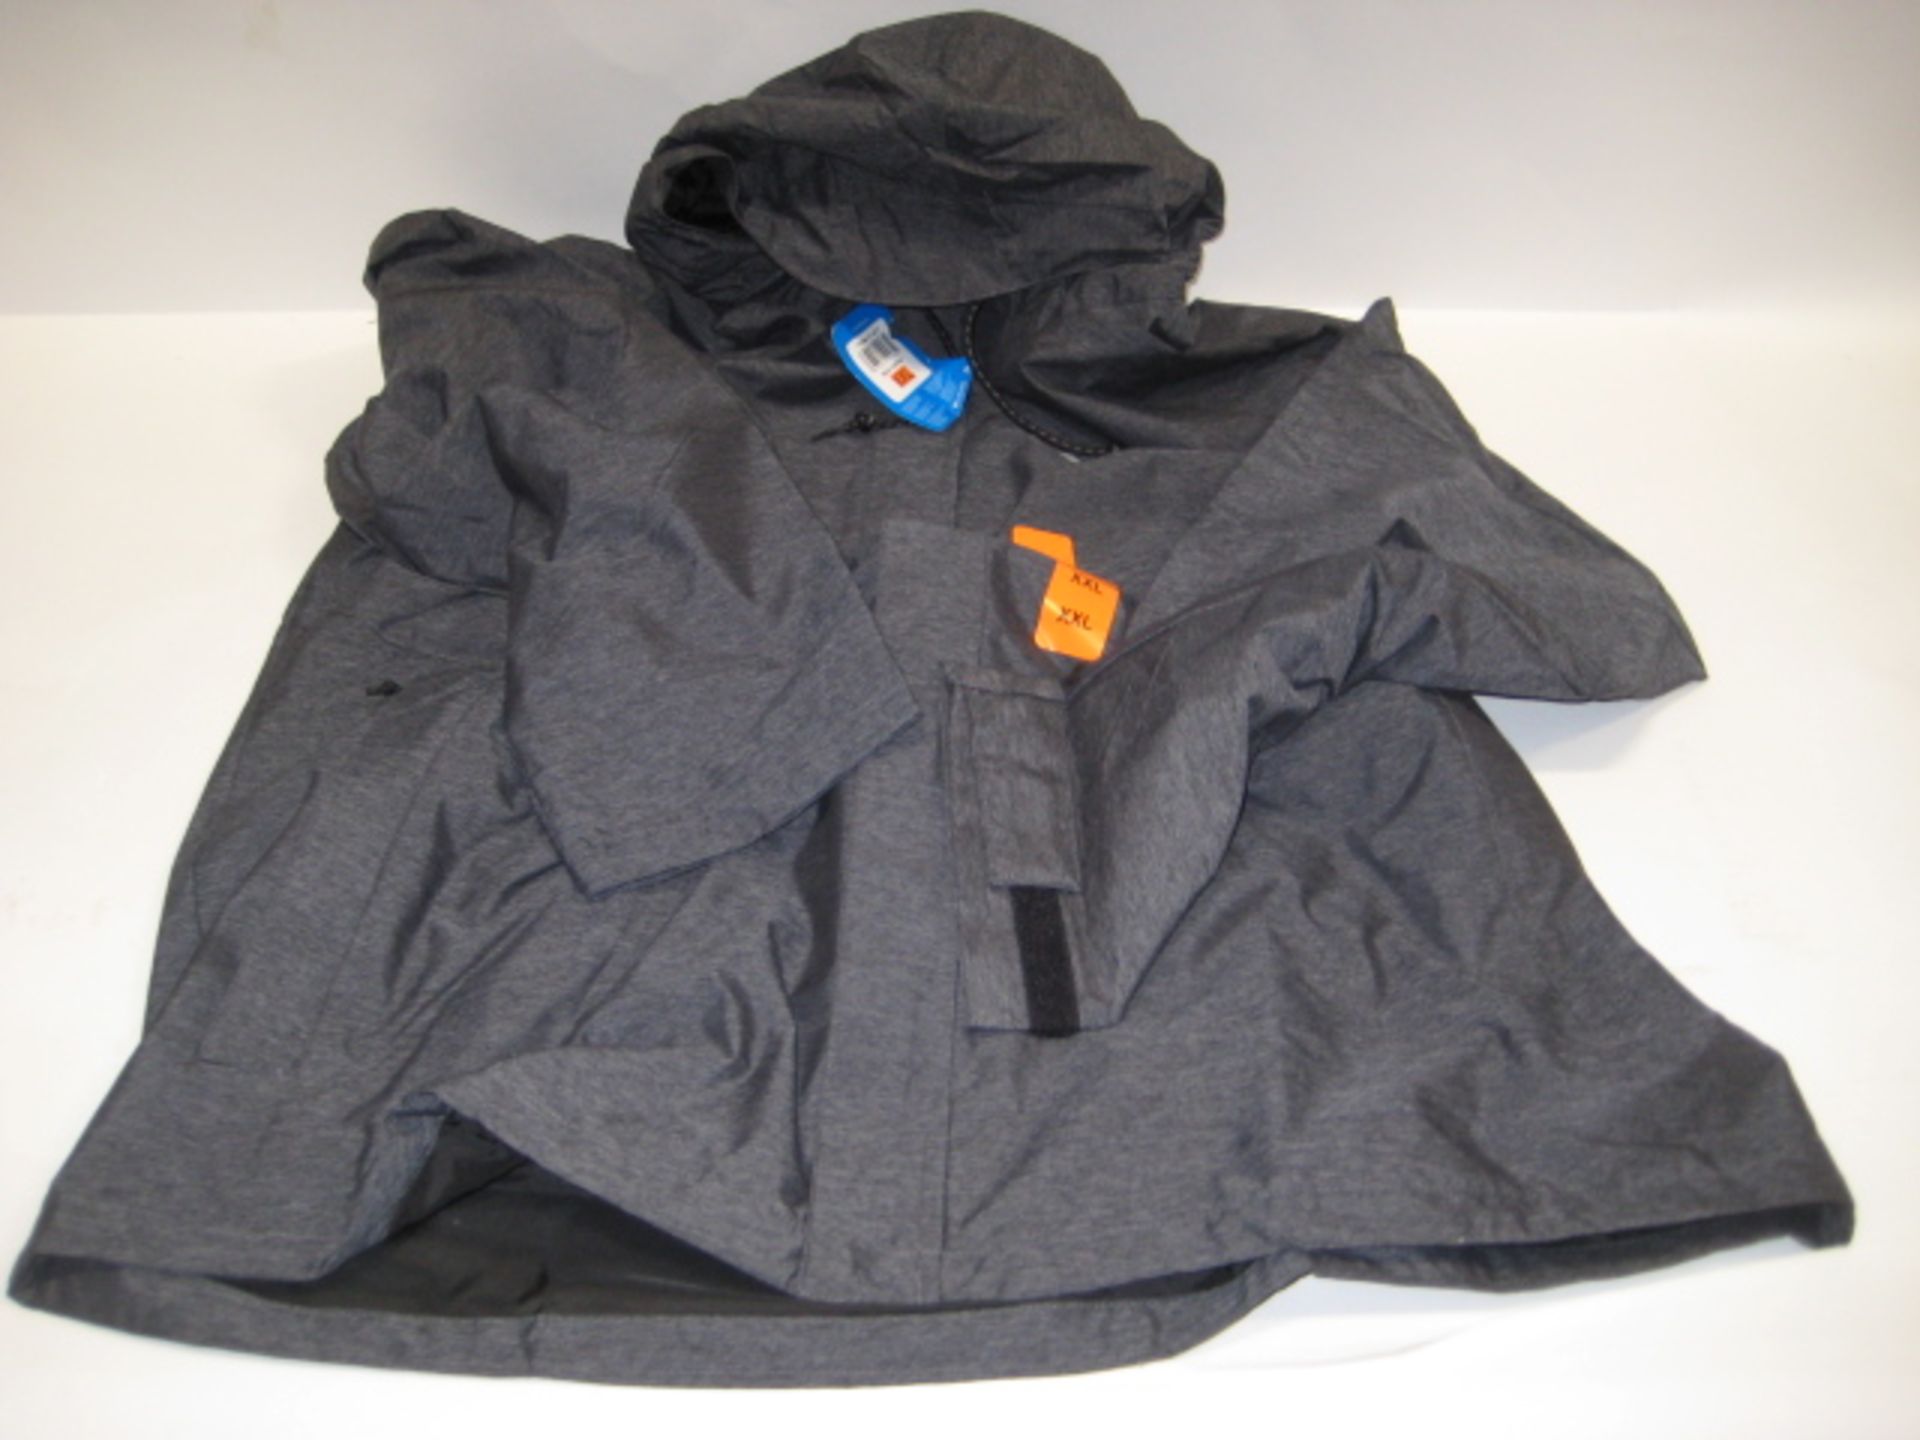 Box containing 20 Columbia light weight hooded rain jackets in grey and blue - Image 2 of 2